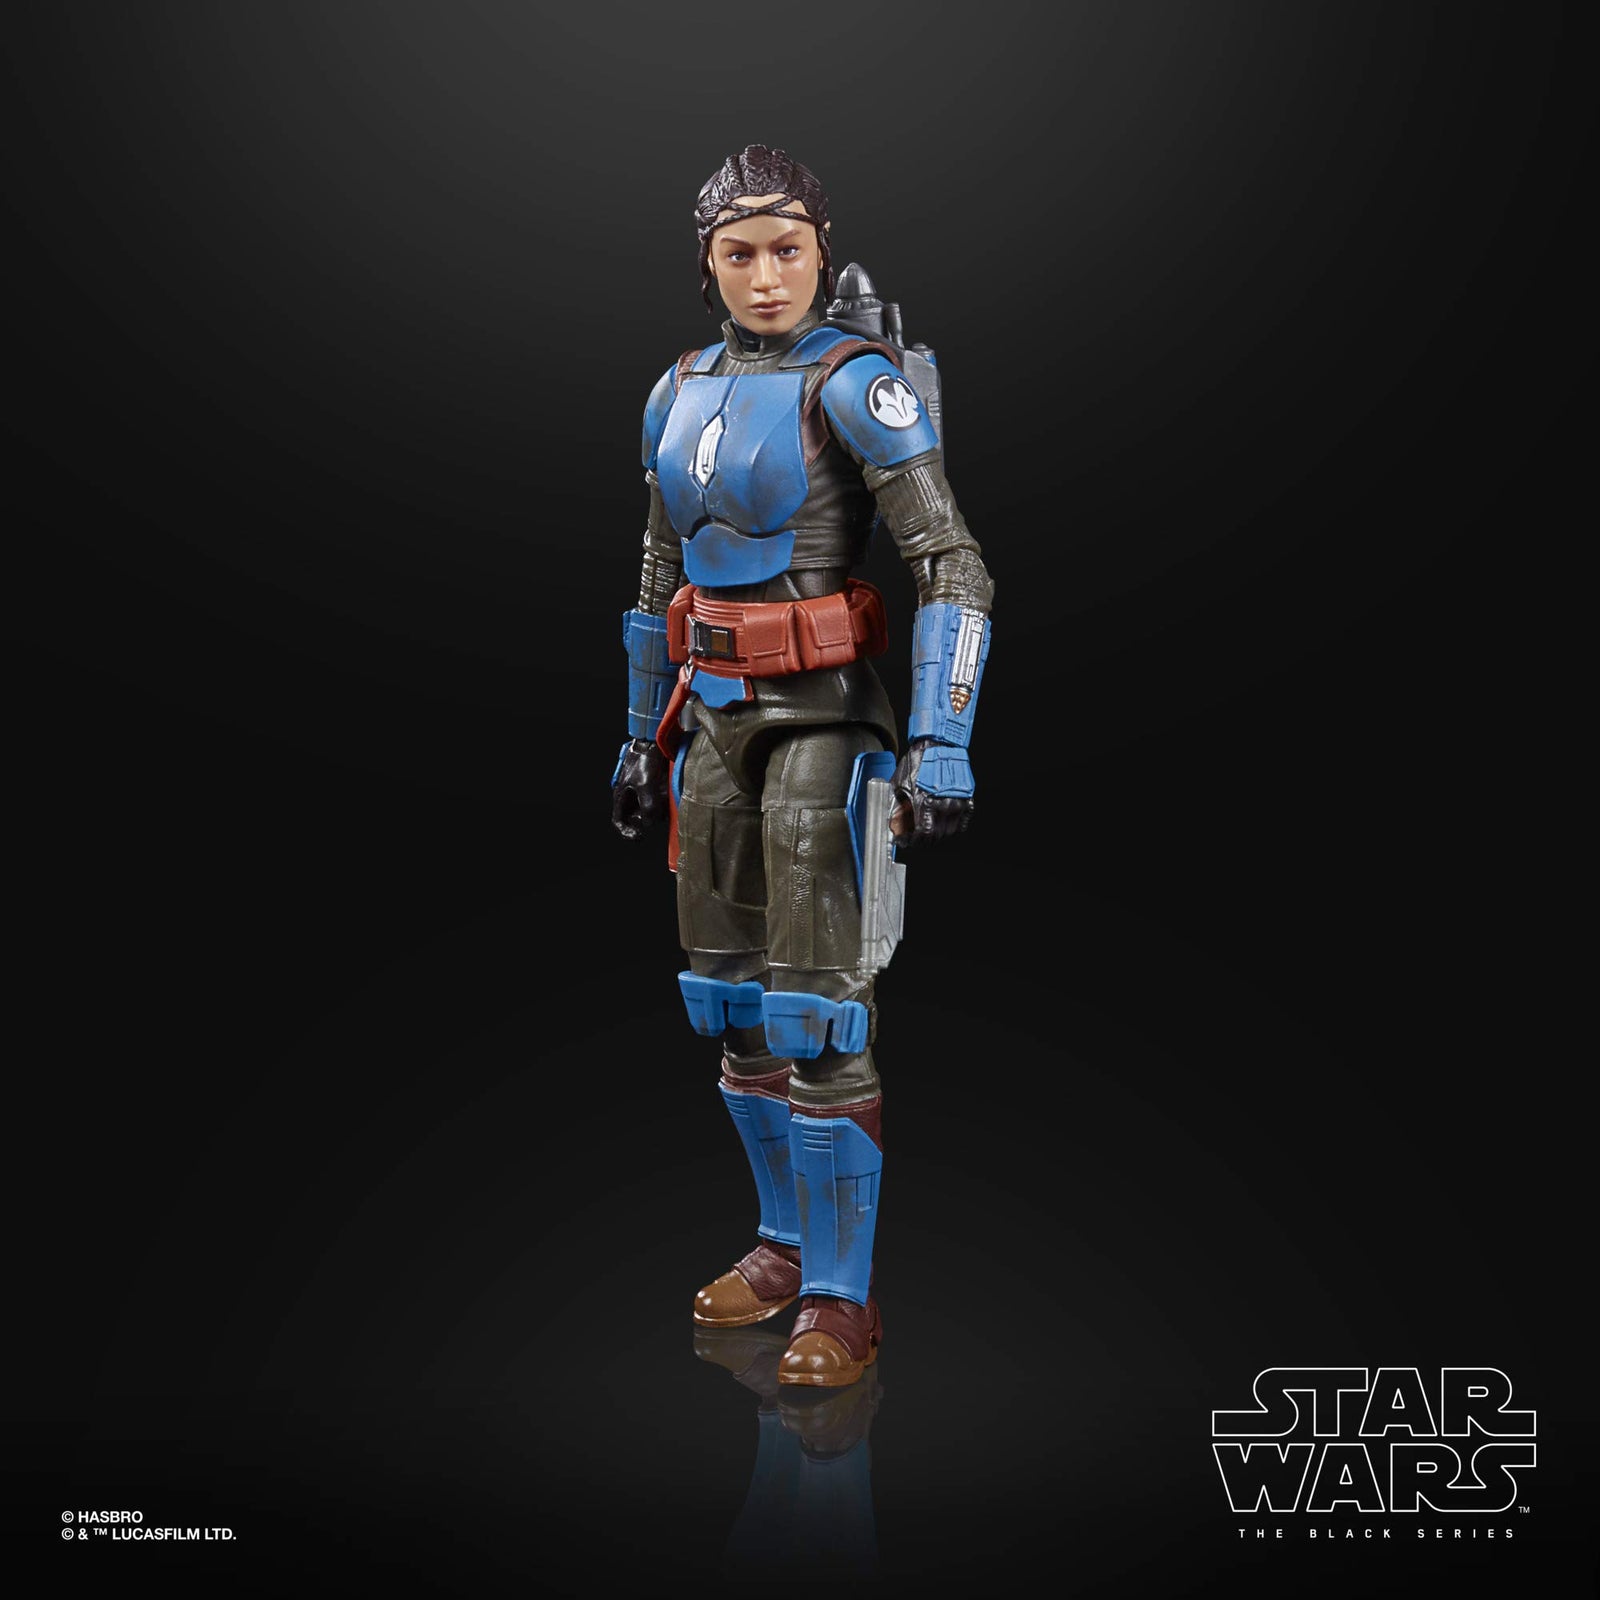 Star Wars The Black Series Koska Reeves Toy 6-Inch-Scale The Mandalorian Collectible Figure with Accessories, Toys for Kids Ages 4 and Up,F1878